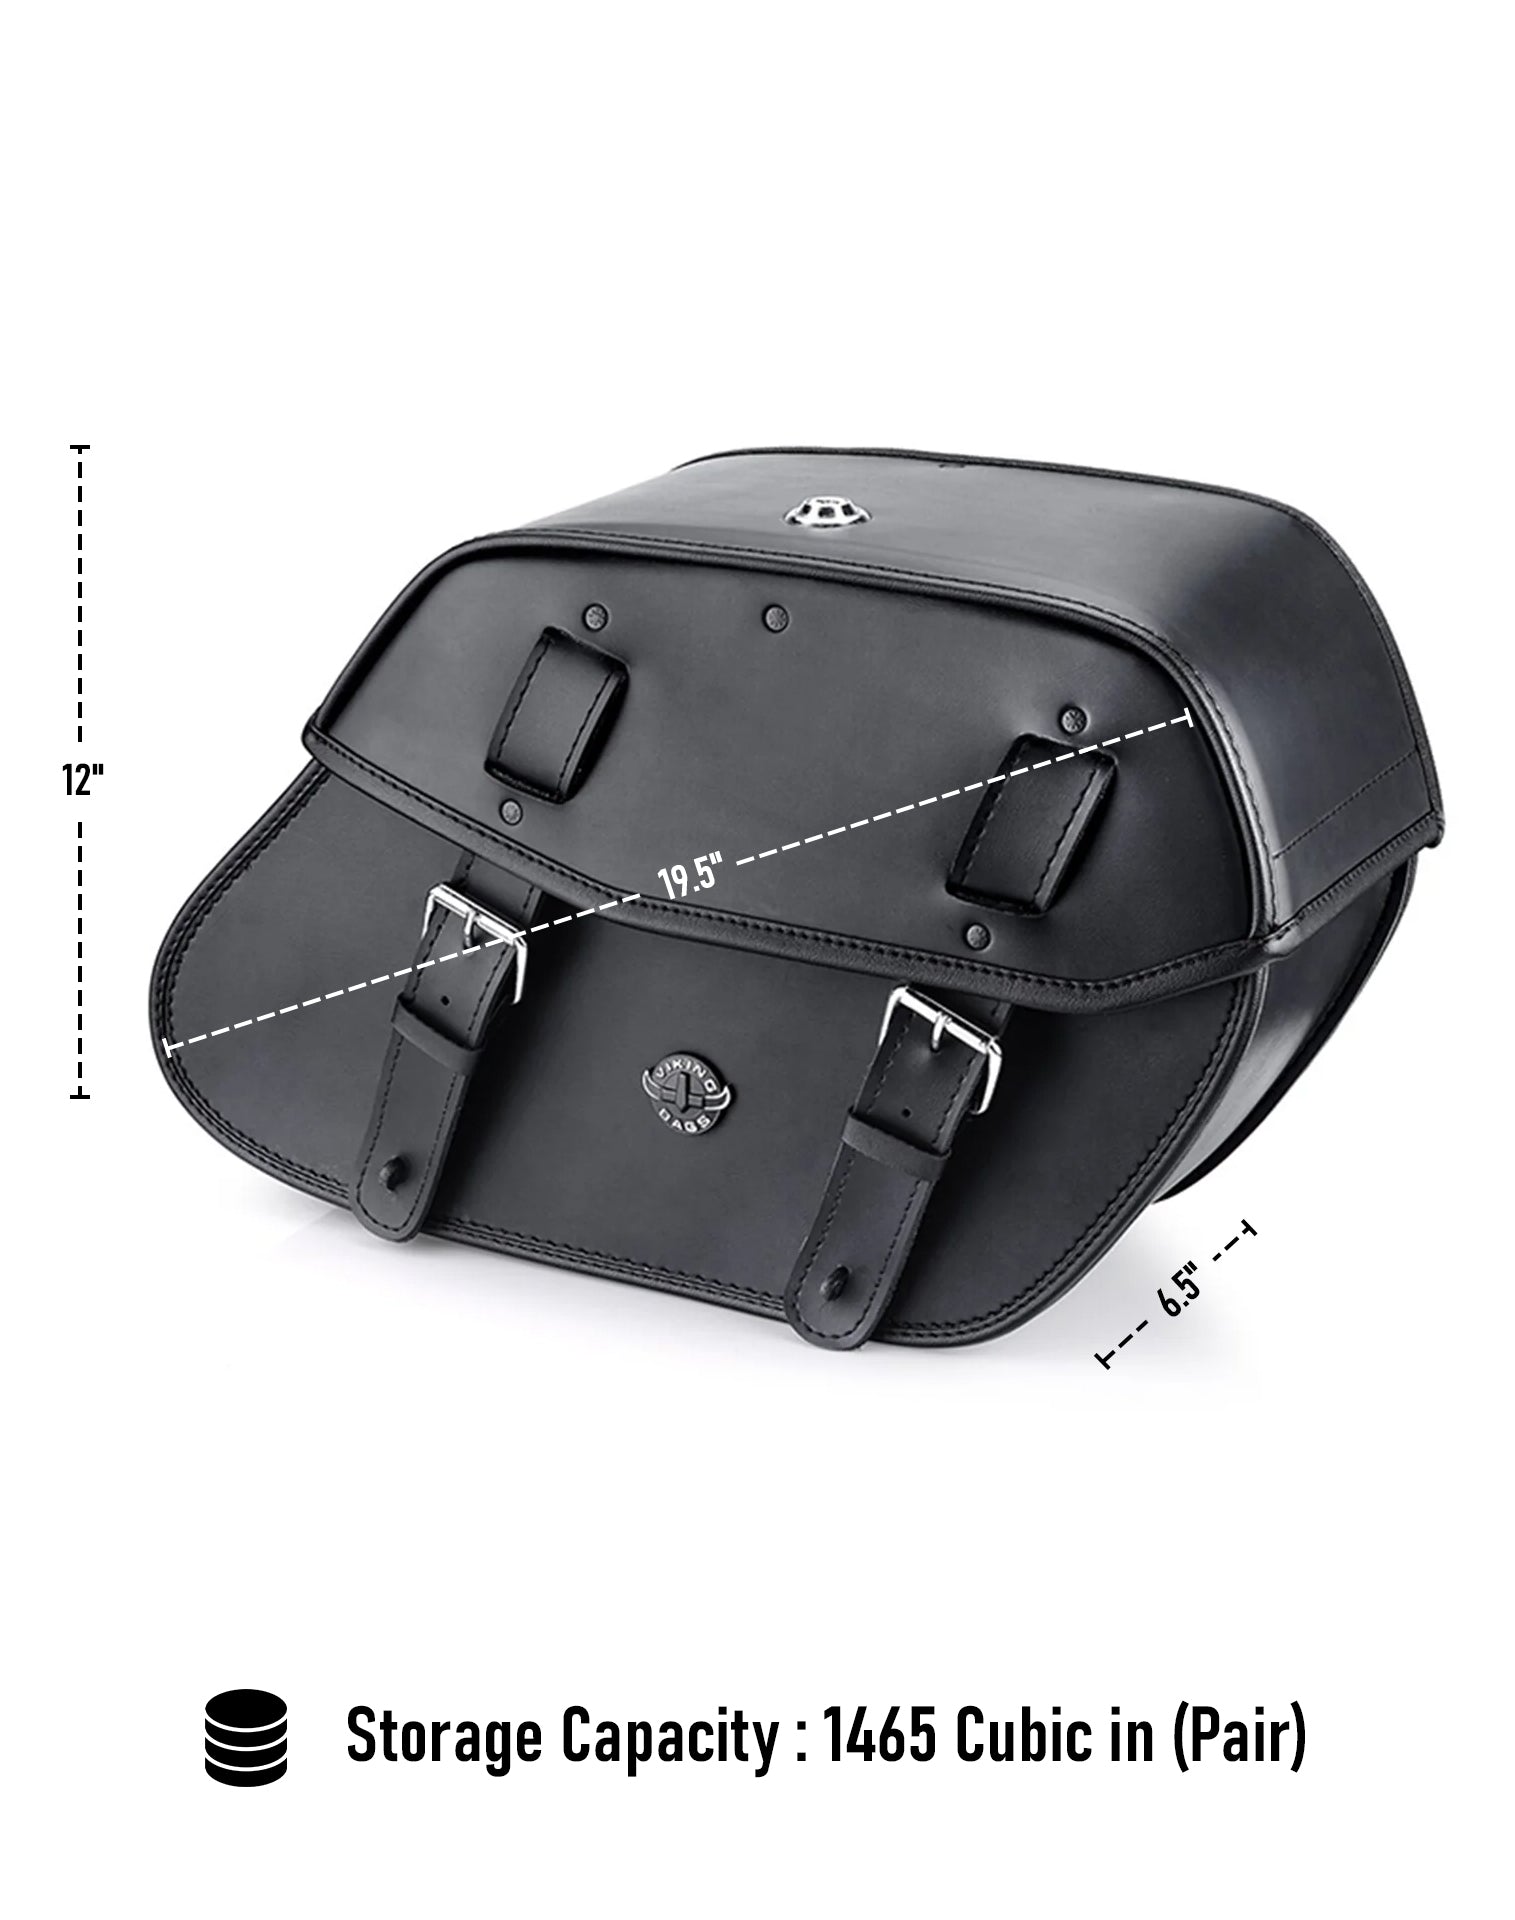 Viking Odin Large Suzuki Boulevard C109 Leather Motorcycle Saddlebags Can Store Your Ridings Gears